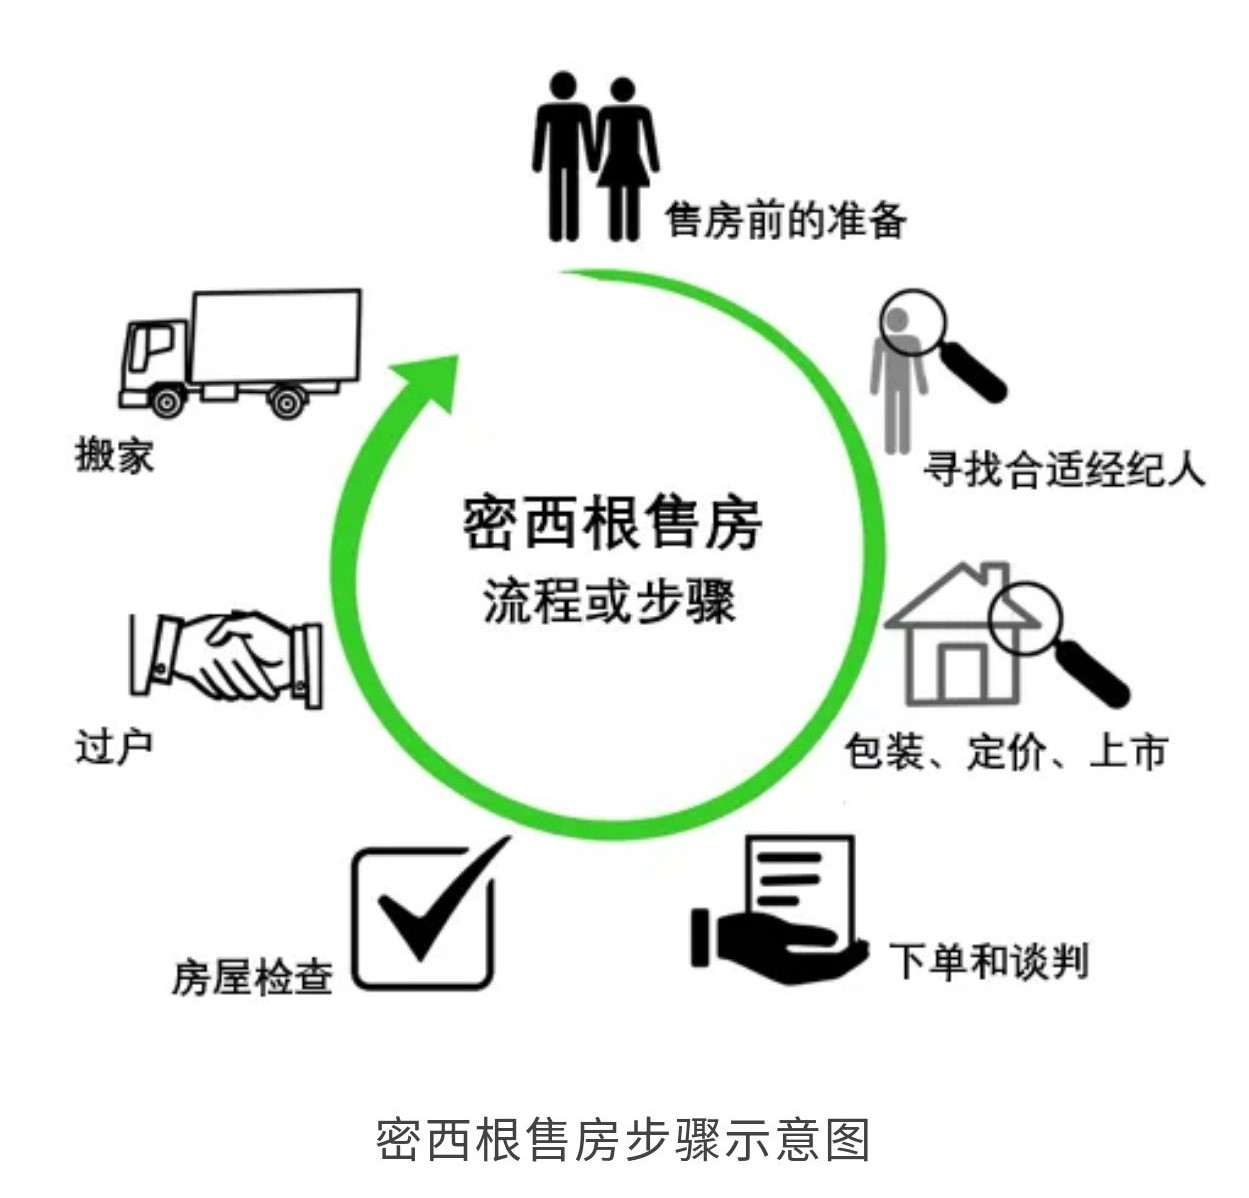 1MR Home Selling Process Chinese